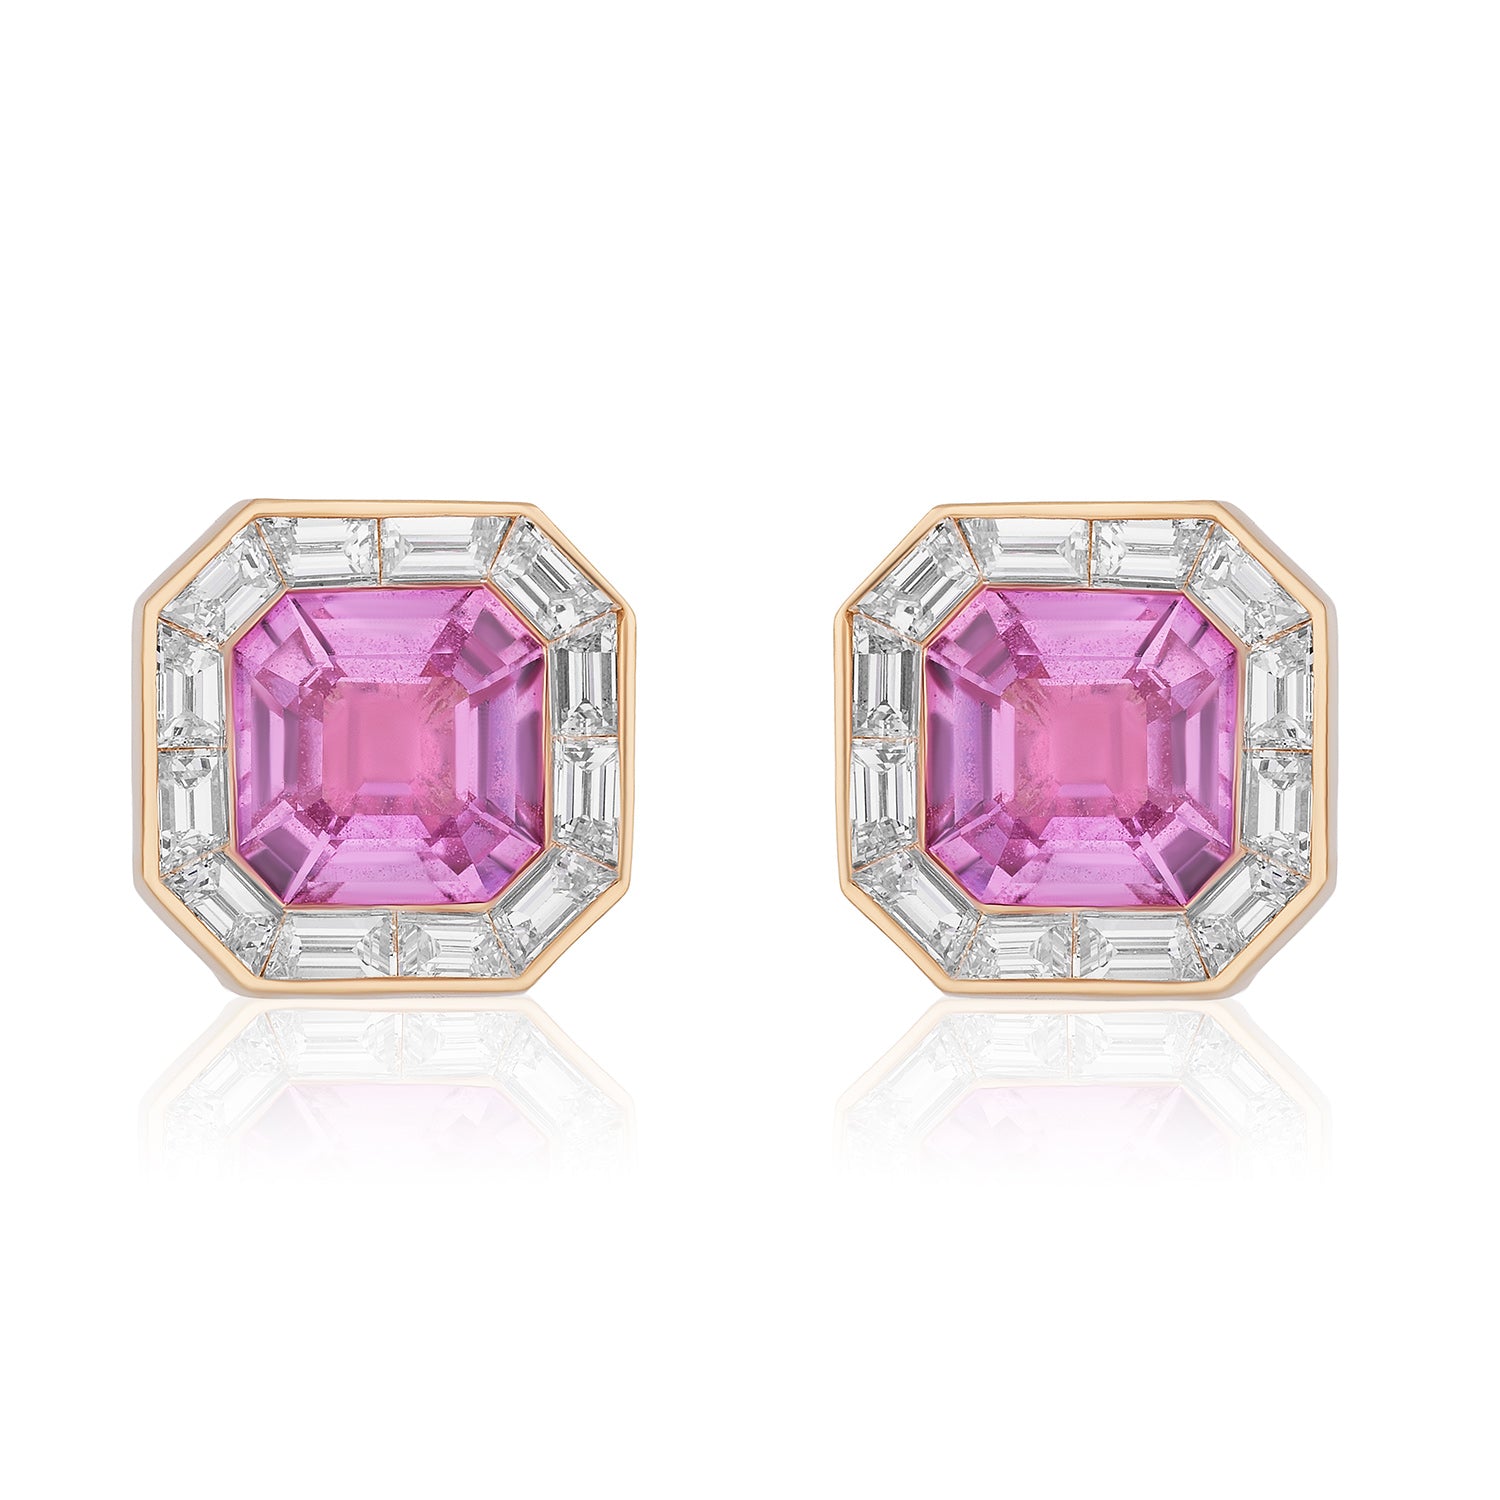 Mosaic Studs in Rose Gold with Pink Asscher Cut Sapphires and Baguette Diamonds